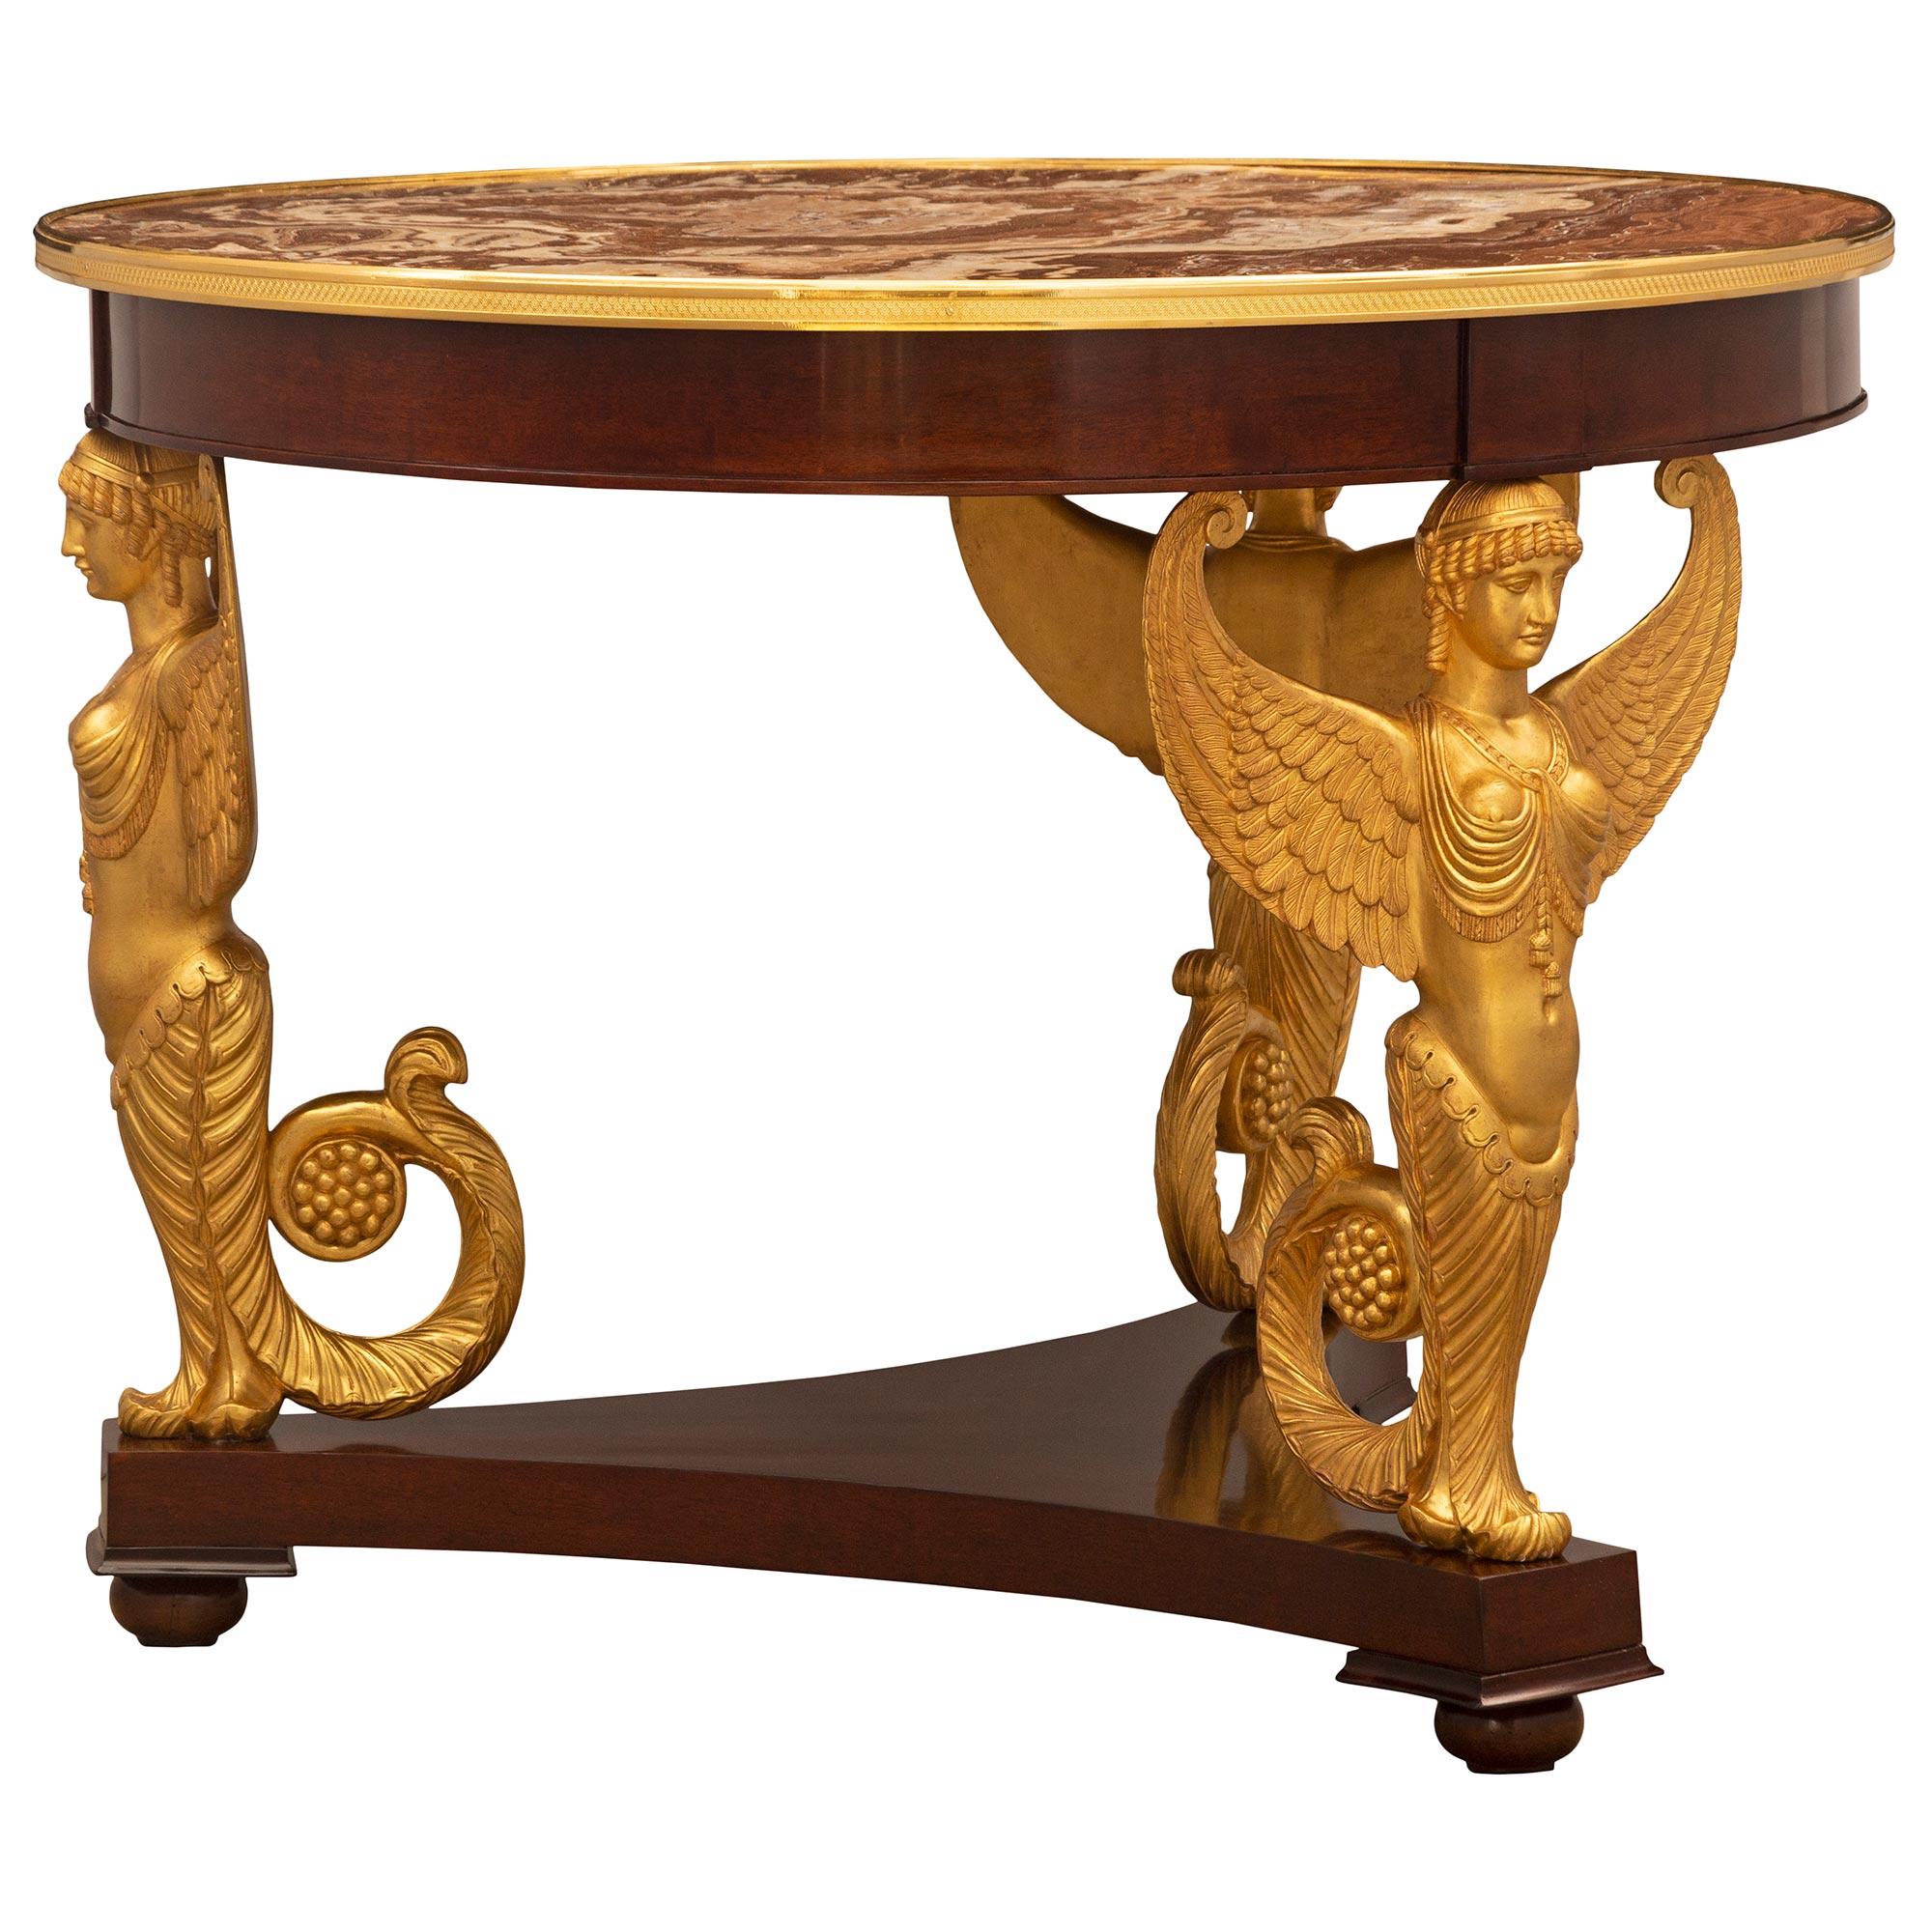 French 19th Century Empire St. Mahogany, Giltwood, Ormolu And Marble Table In Good Condition For Sale In West Palm Beach, FL